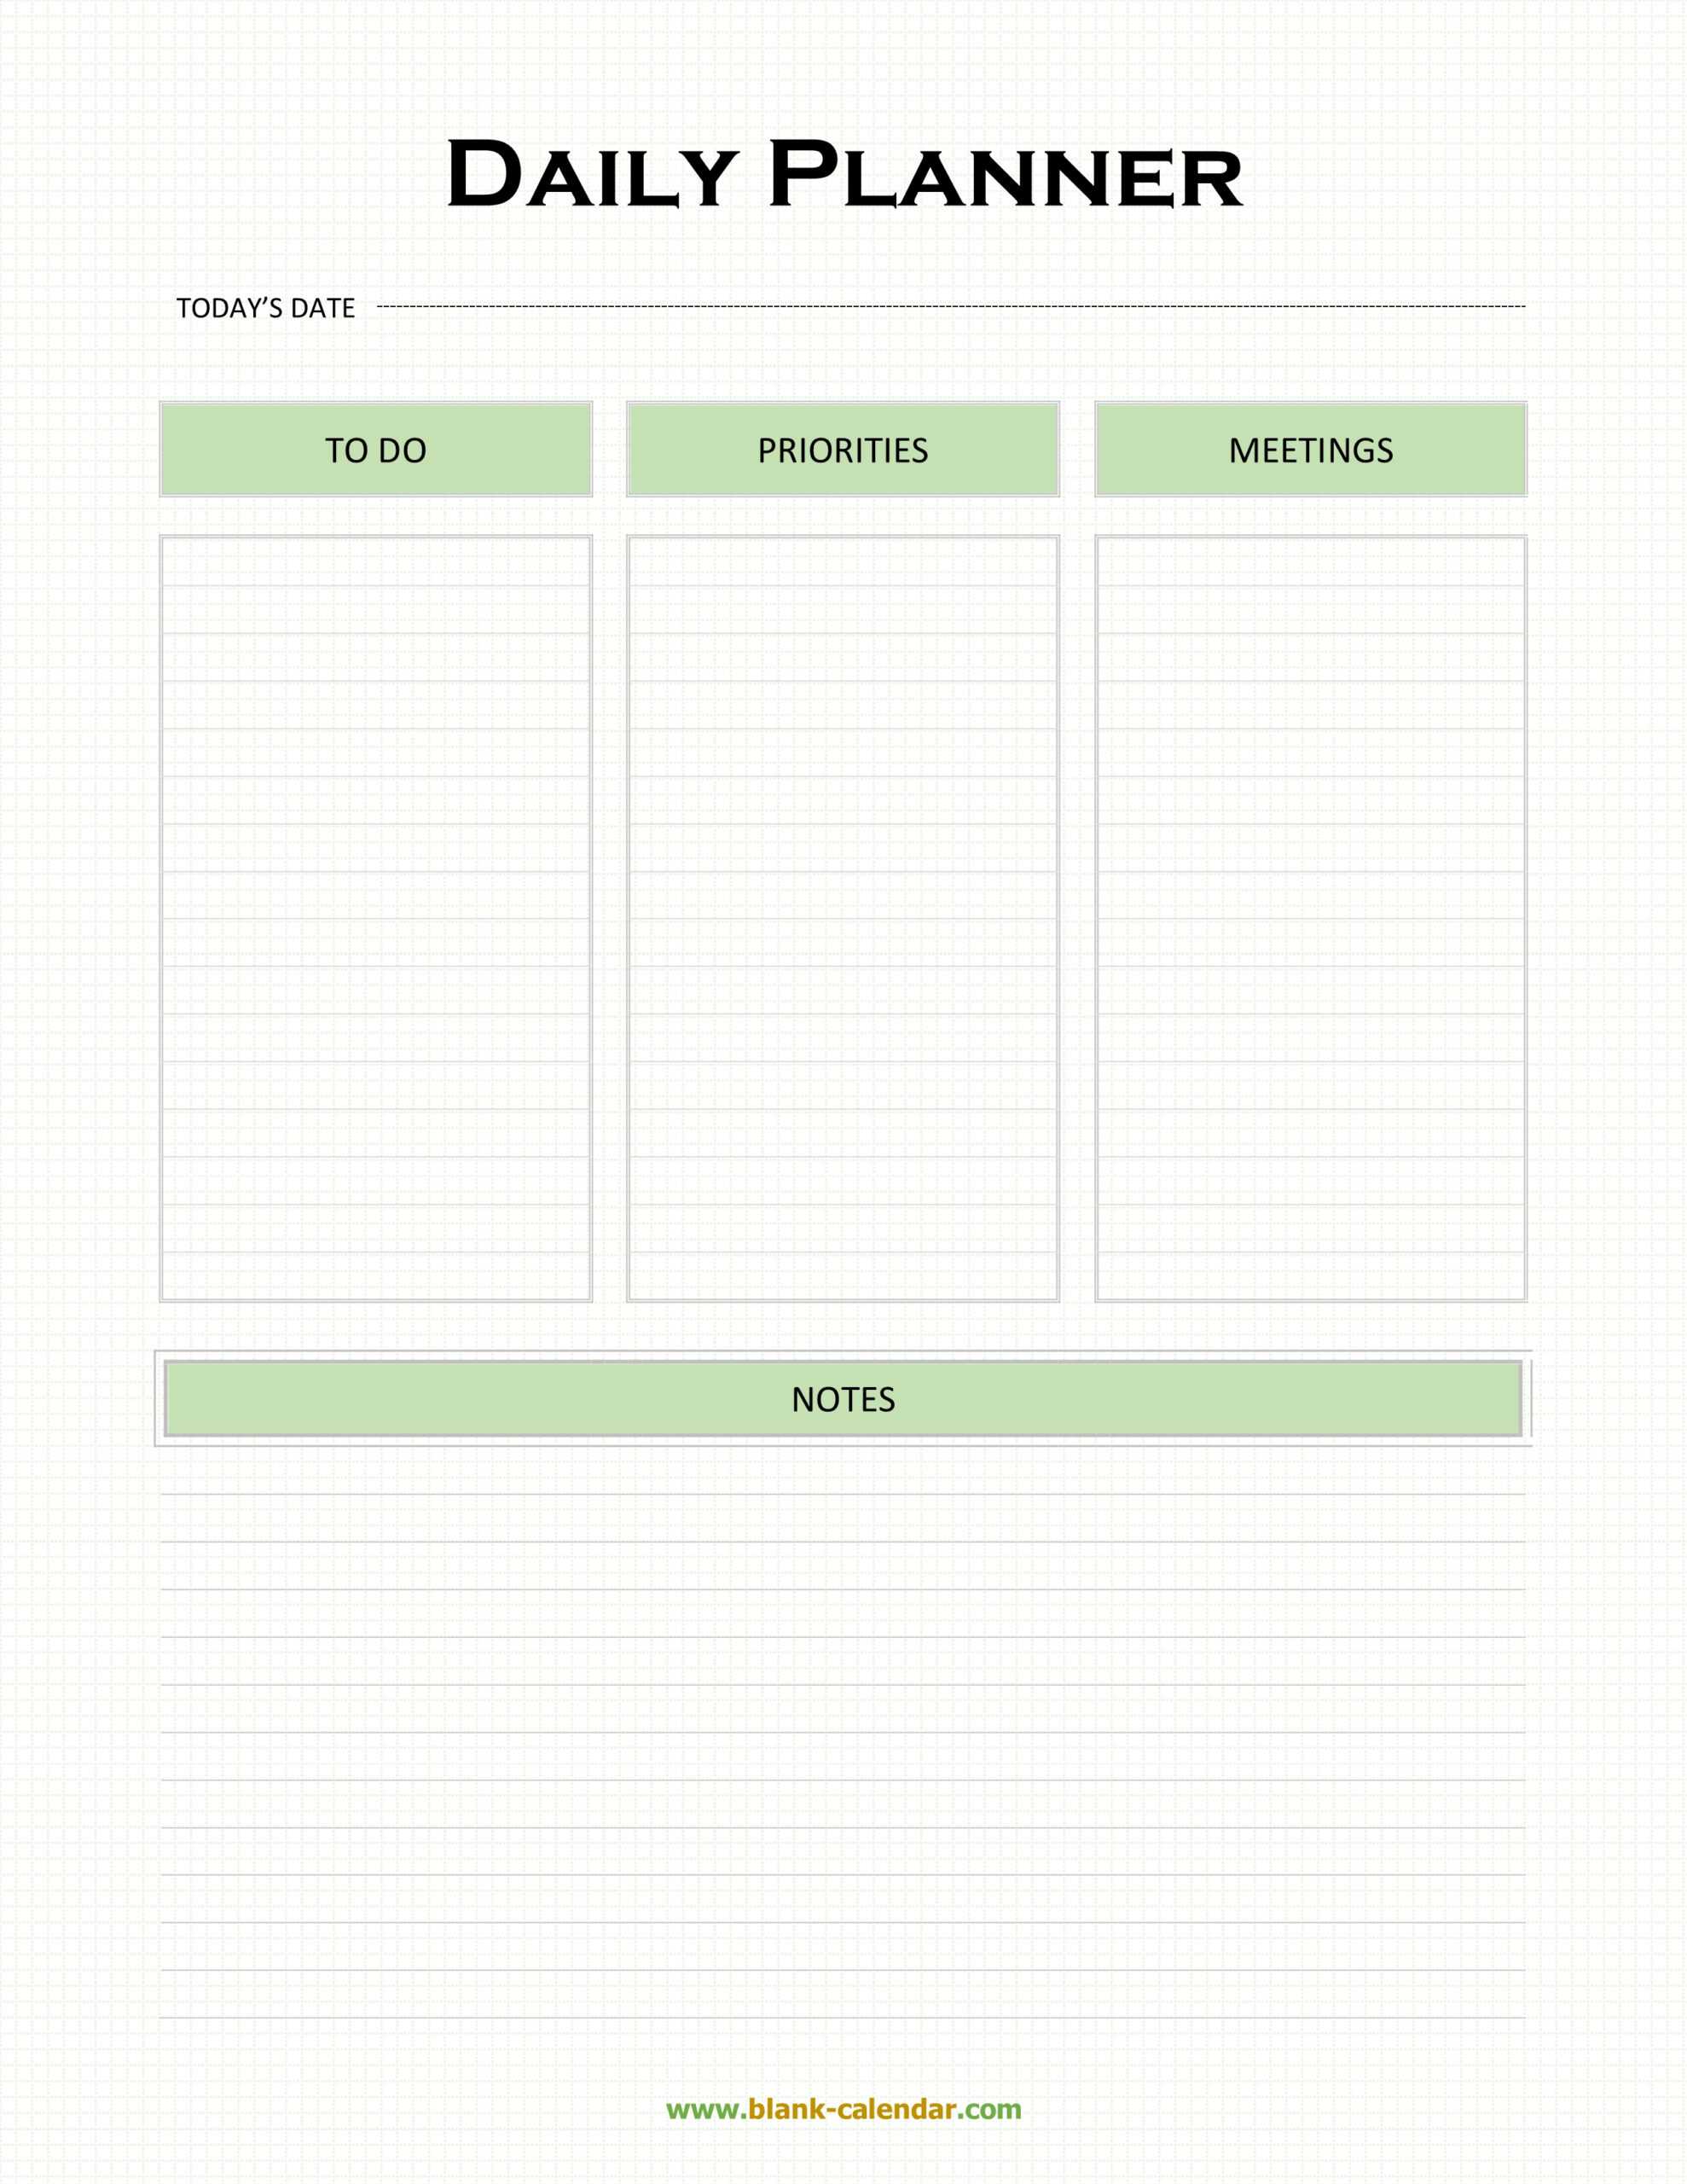 Daily Planner Templates (Word, Excel, Pdf) Pertaining To Printable Blank Daily Schedule Template